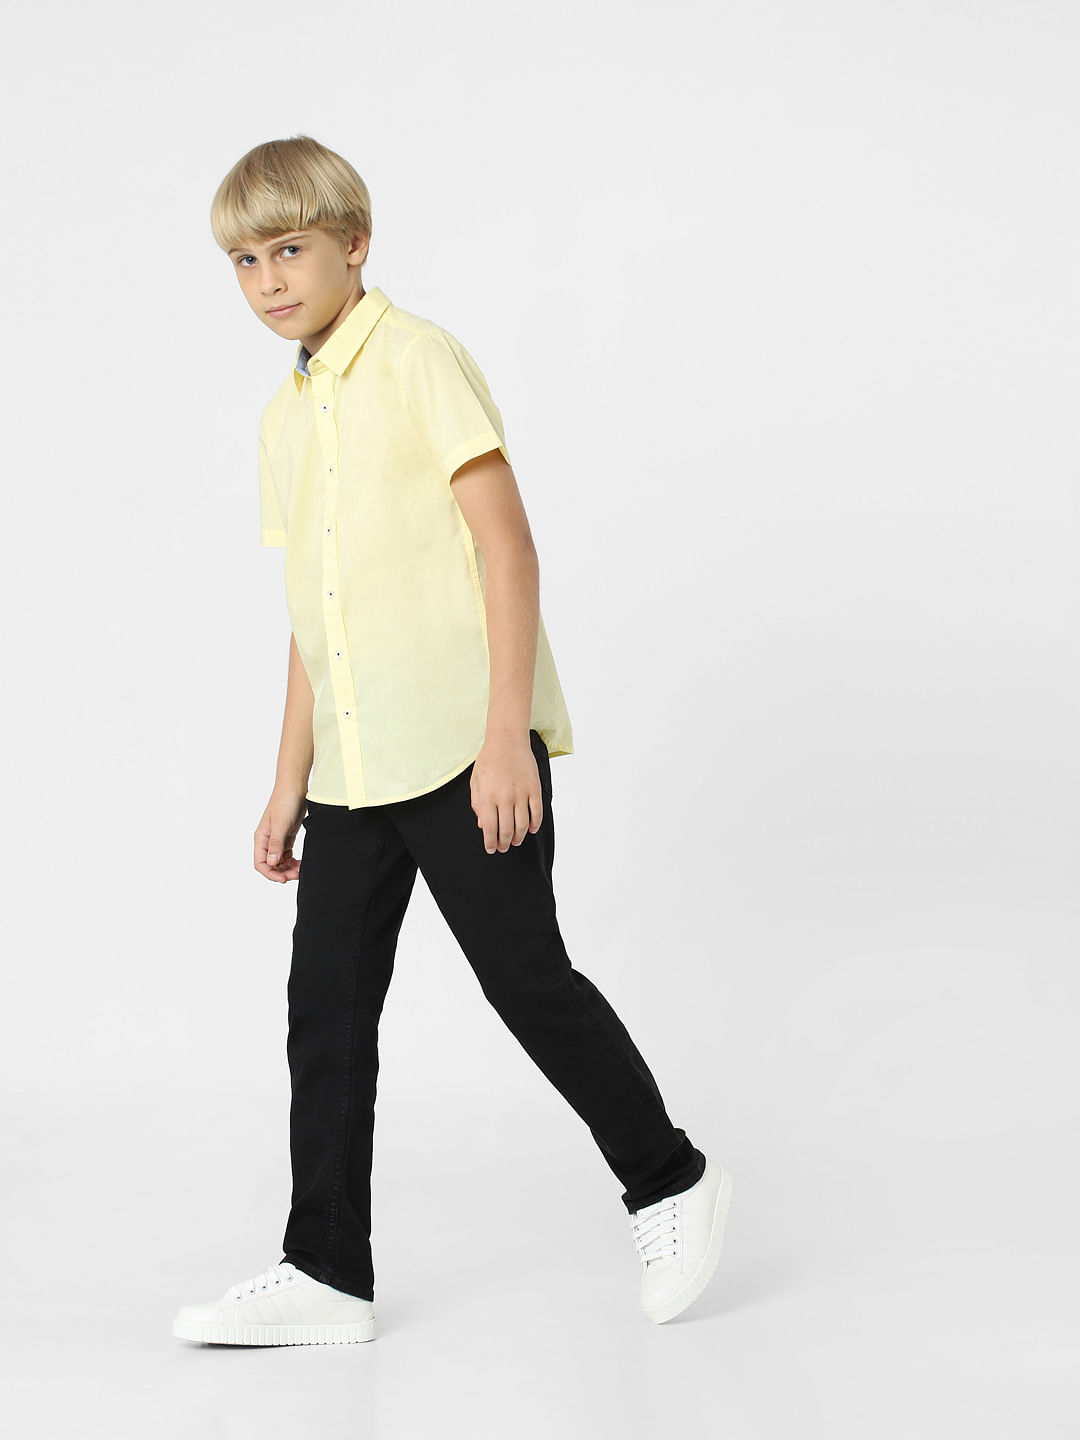 Buy Mee Mee Kids Light Yellow & Blue Shirt with Trousers for Boys Clothing  Online @ Tata CLiQ